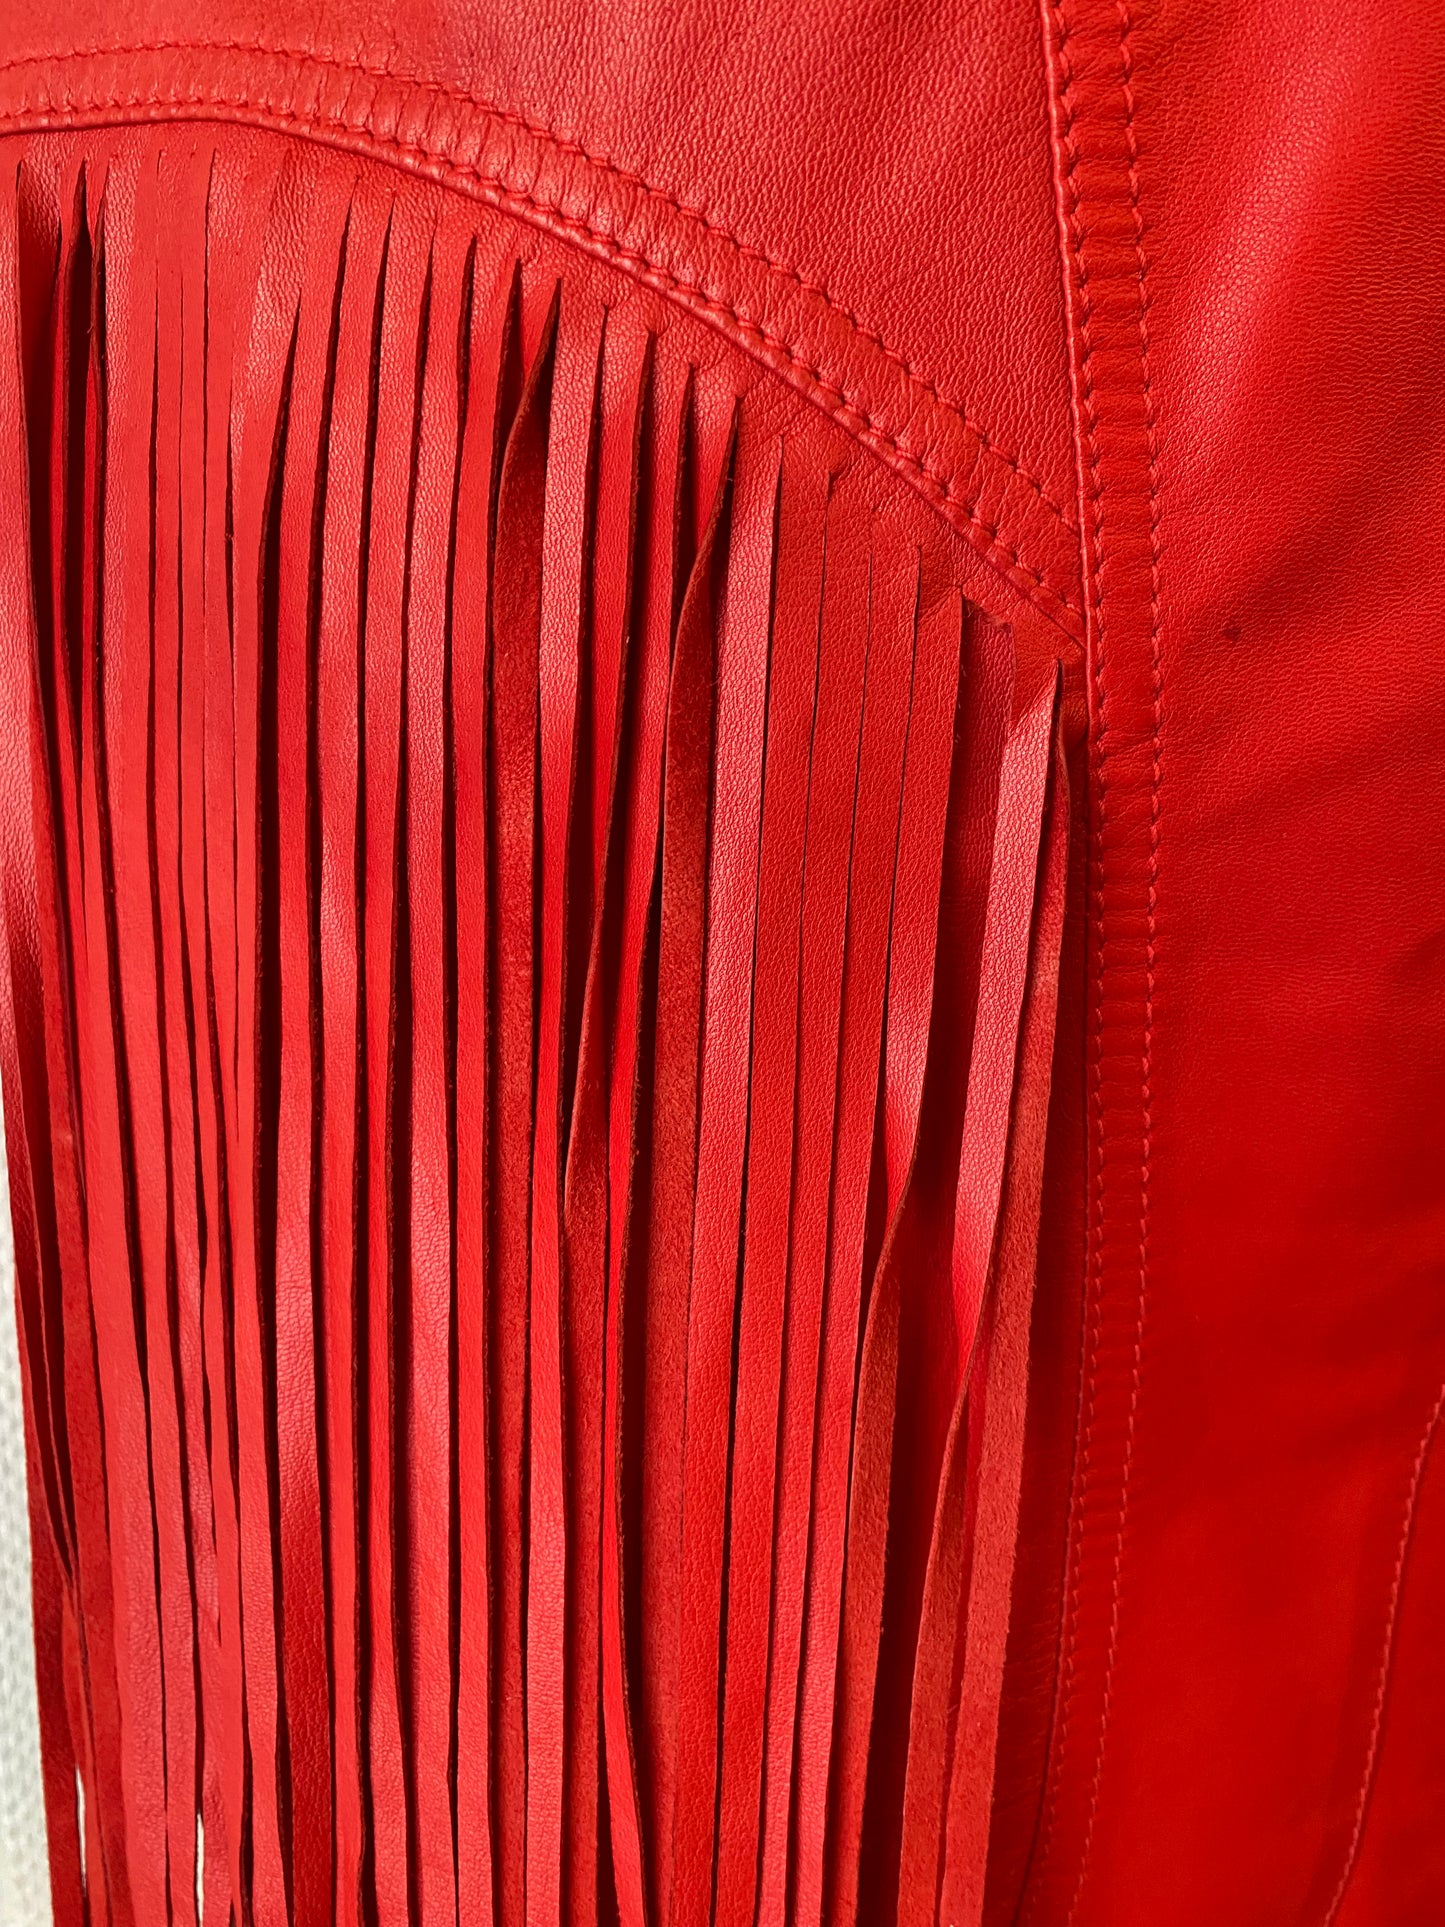 VERSACE Leather Red Dress Size 36